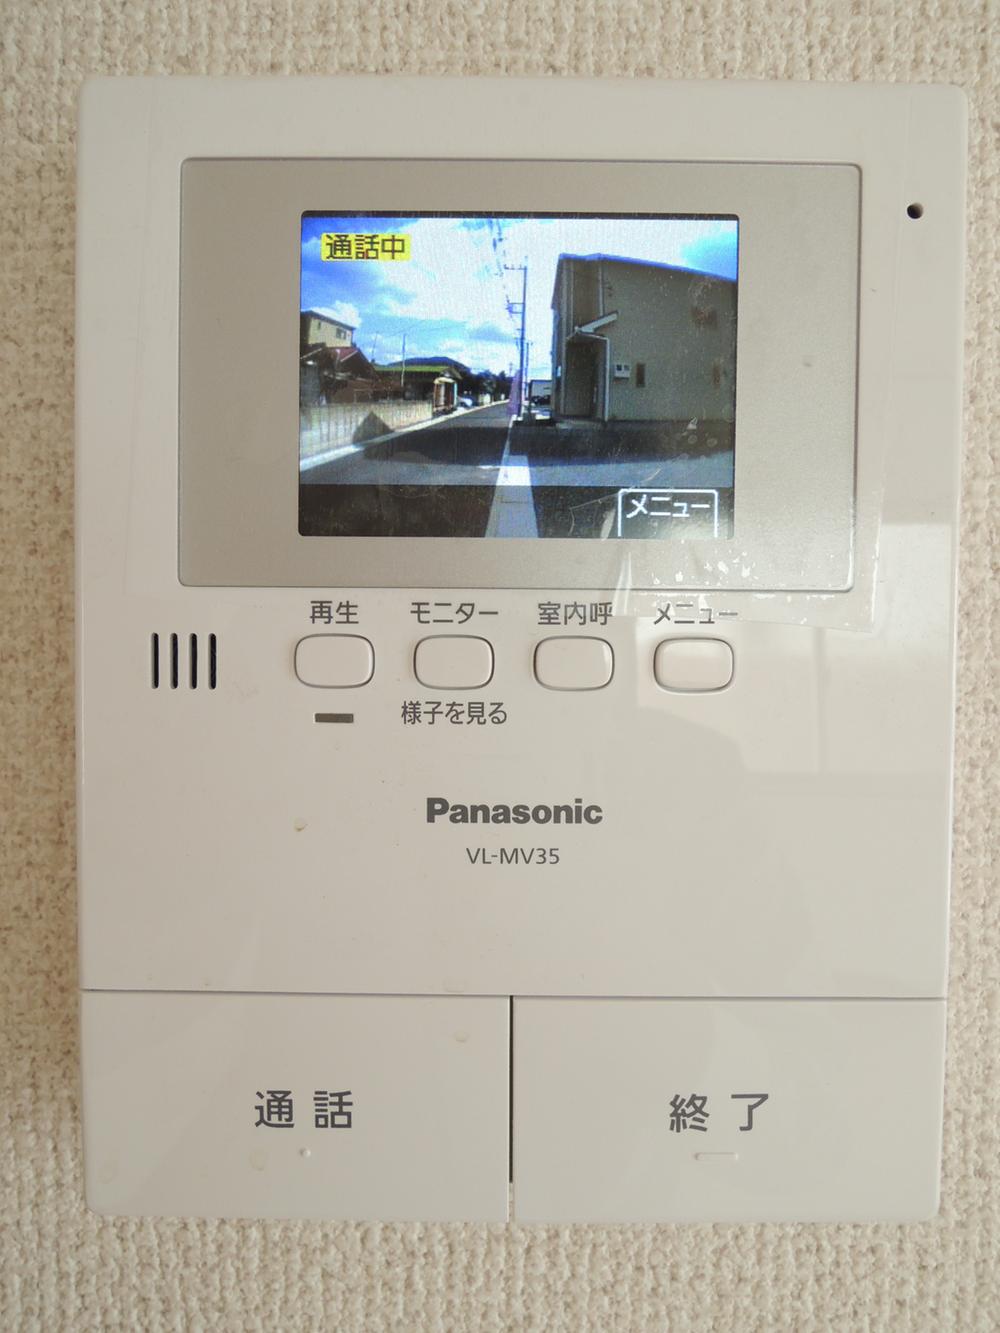 Security equipment. Color monitor phone